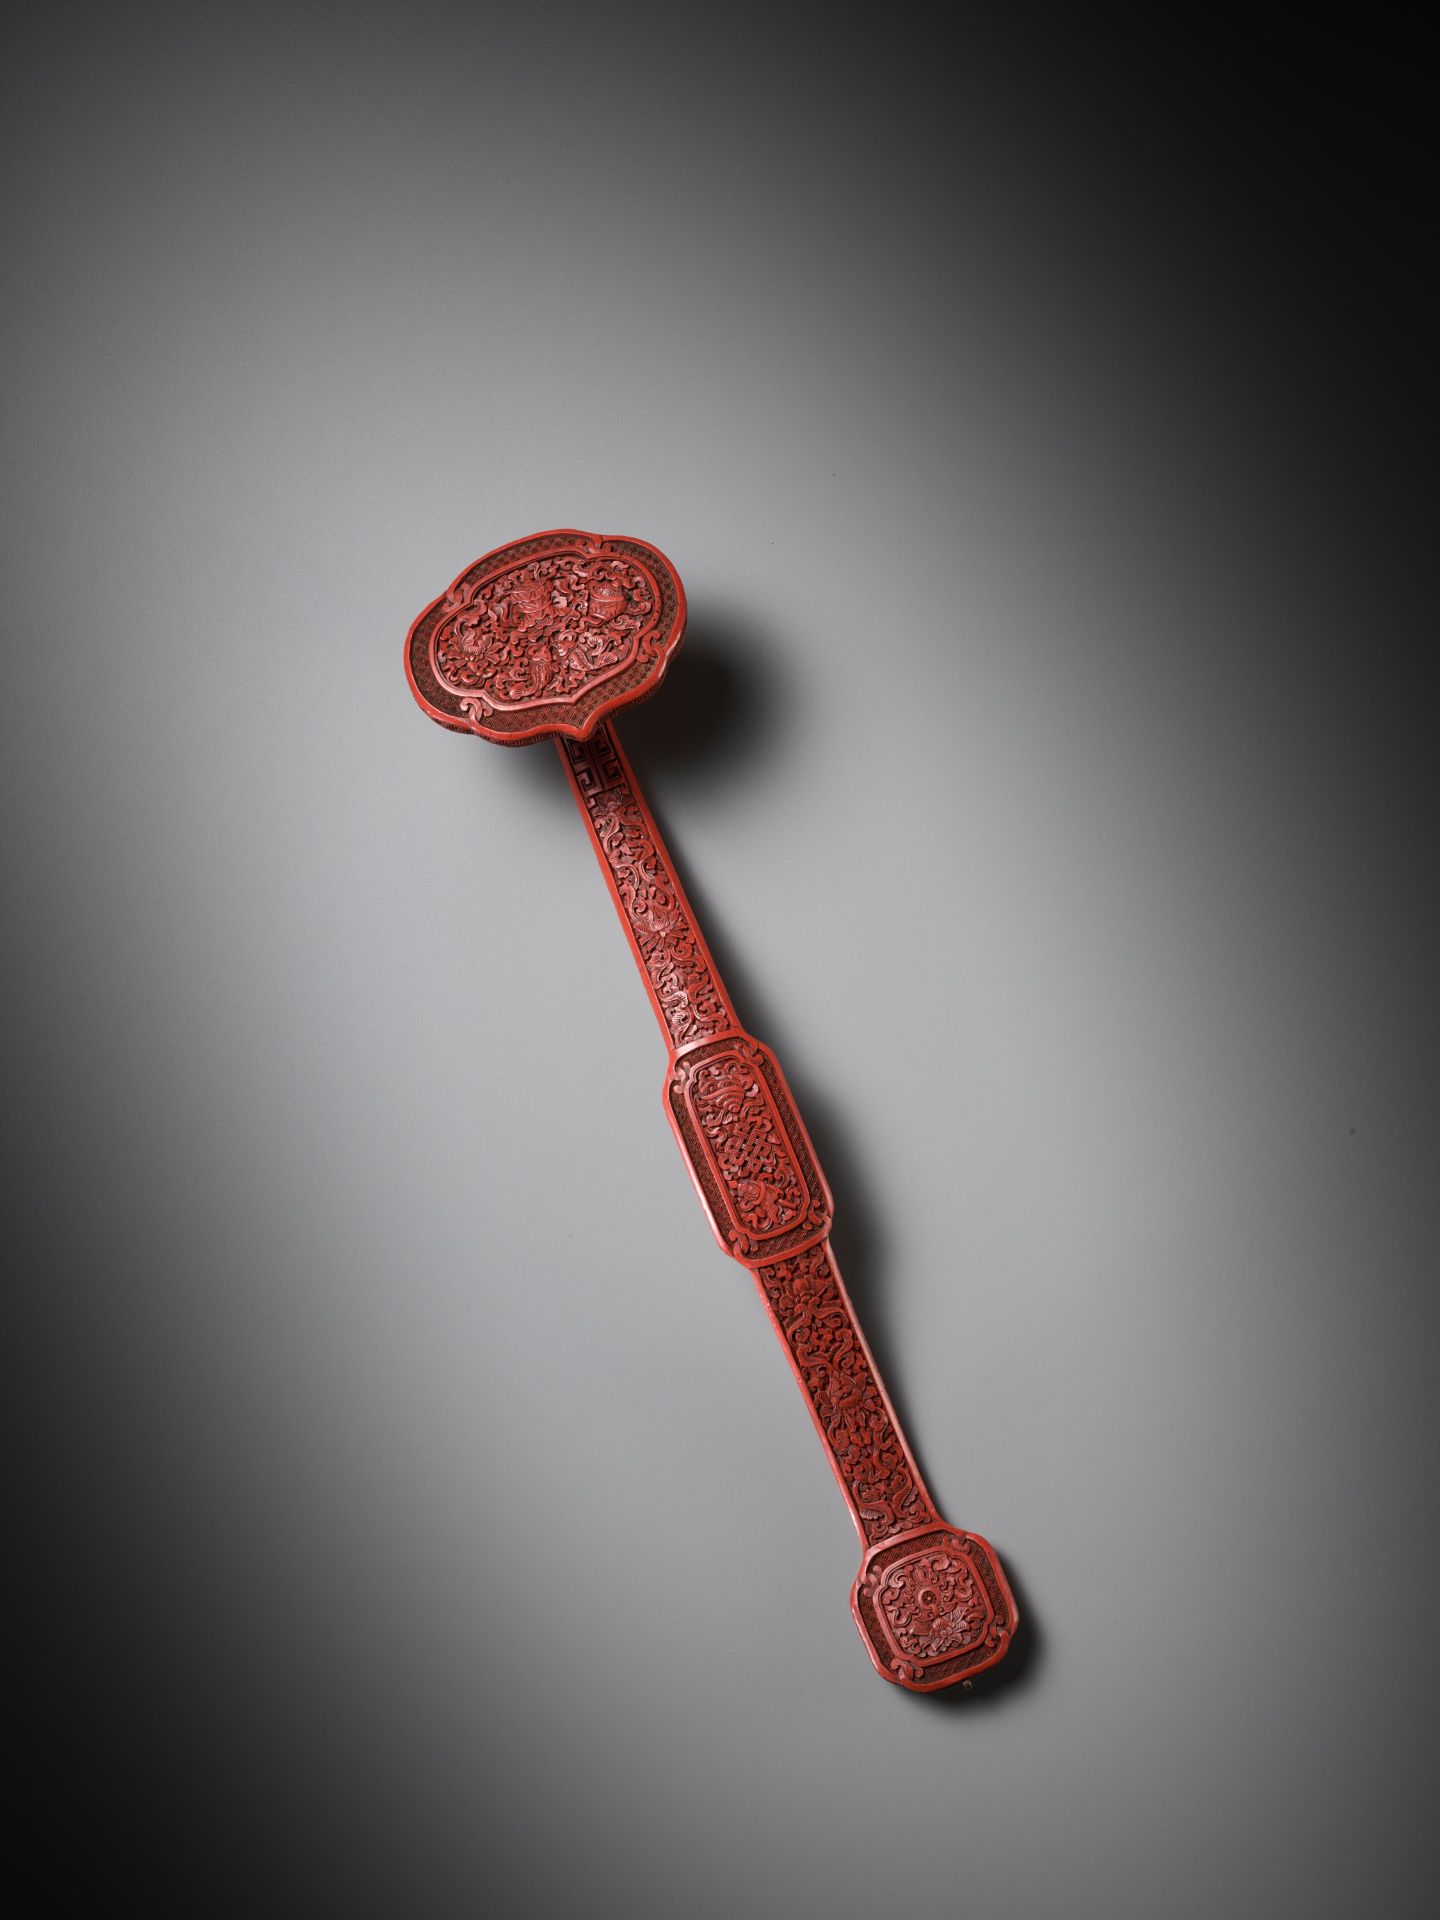 A CARVED CINNABAR LACQUER 'BAJIXIANG' RUYI SCEPTER, QING DYNASTY